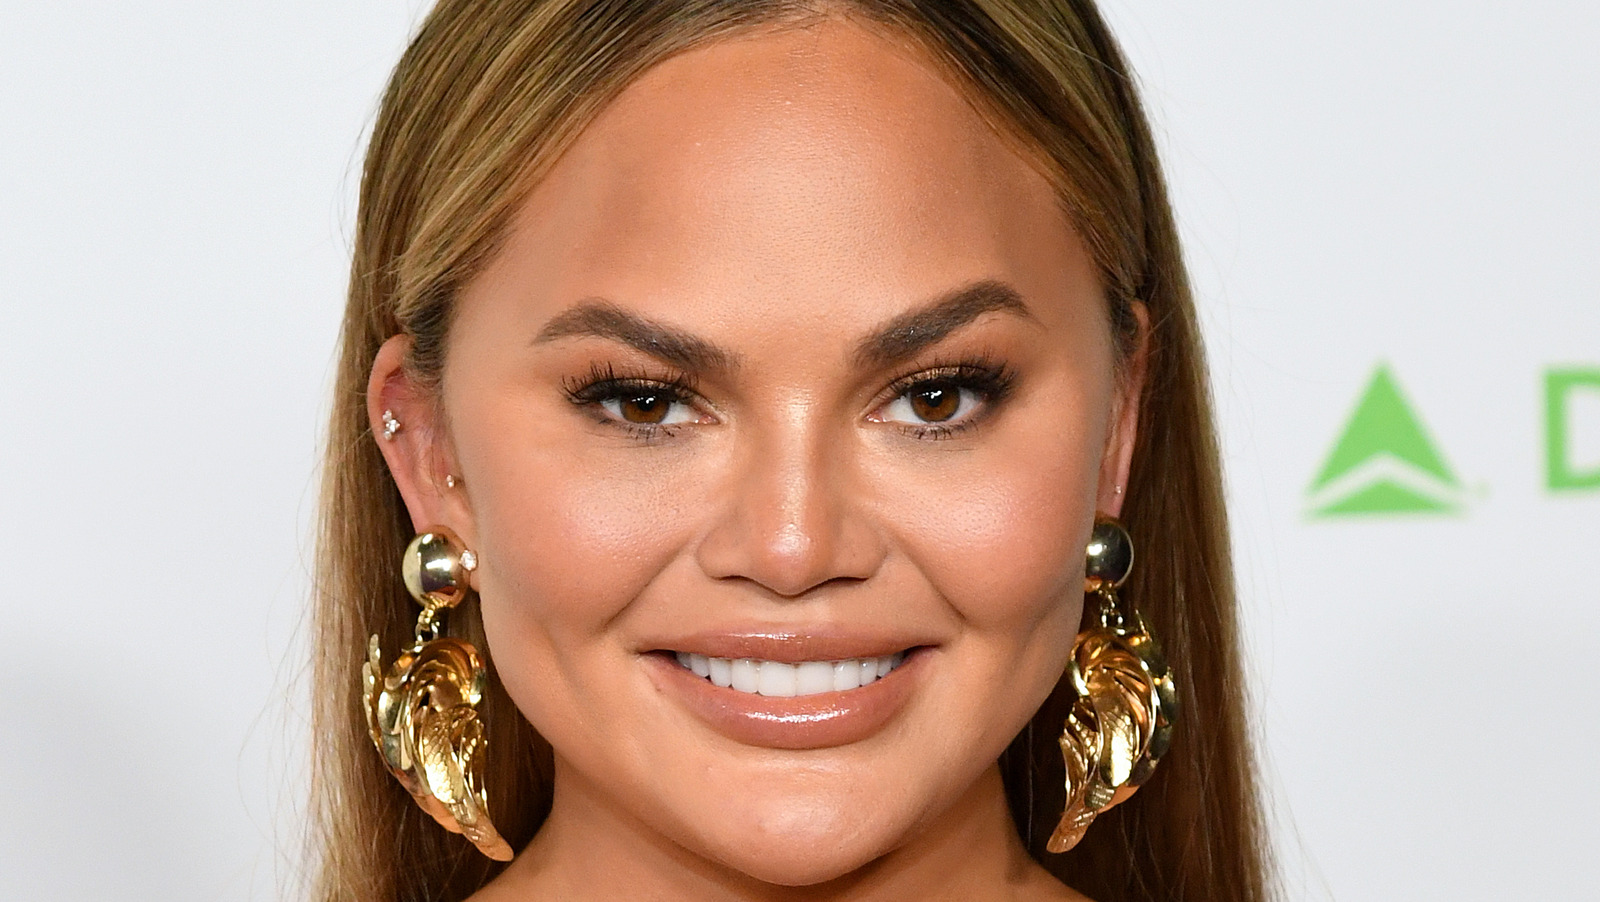 Chrissy Teigen Look Like Before and After Plastic Surgery?